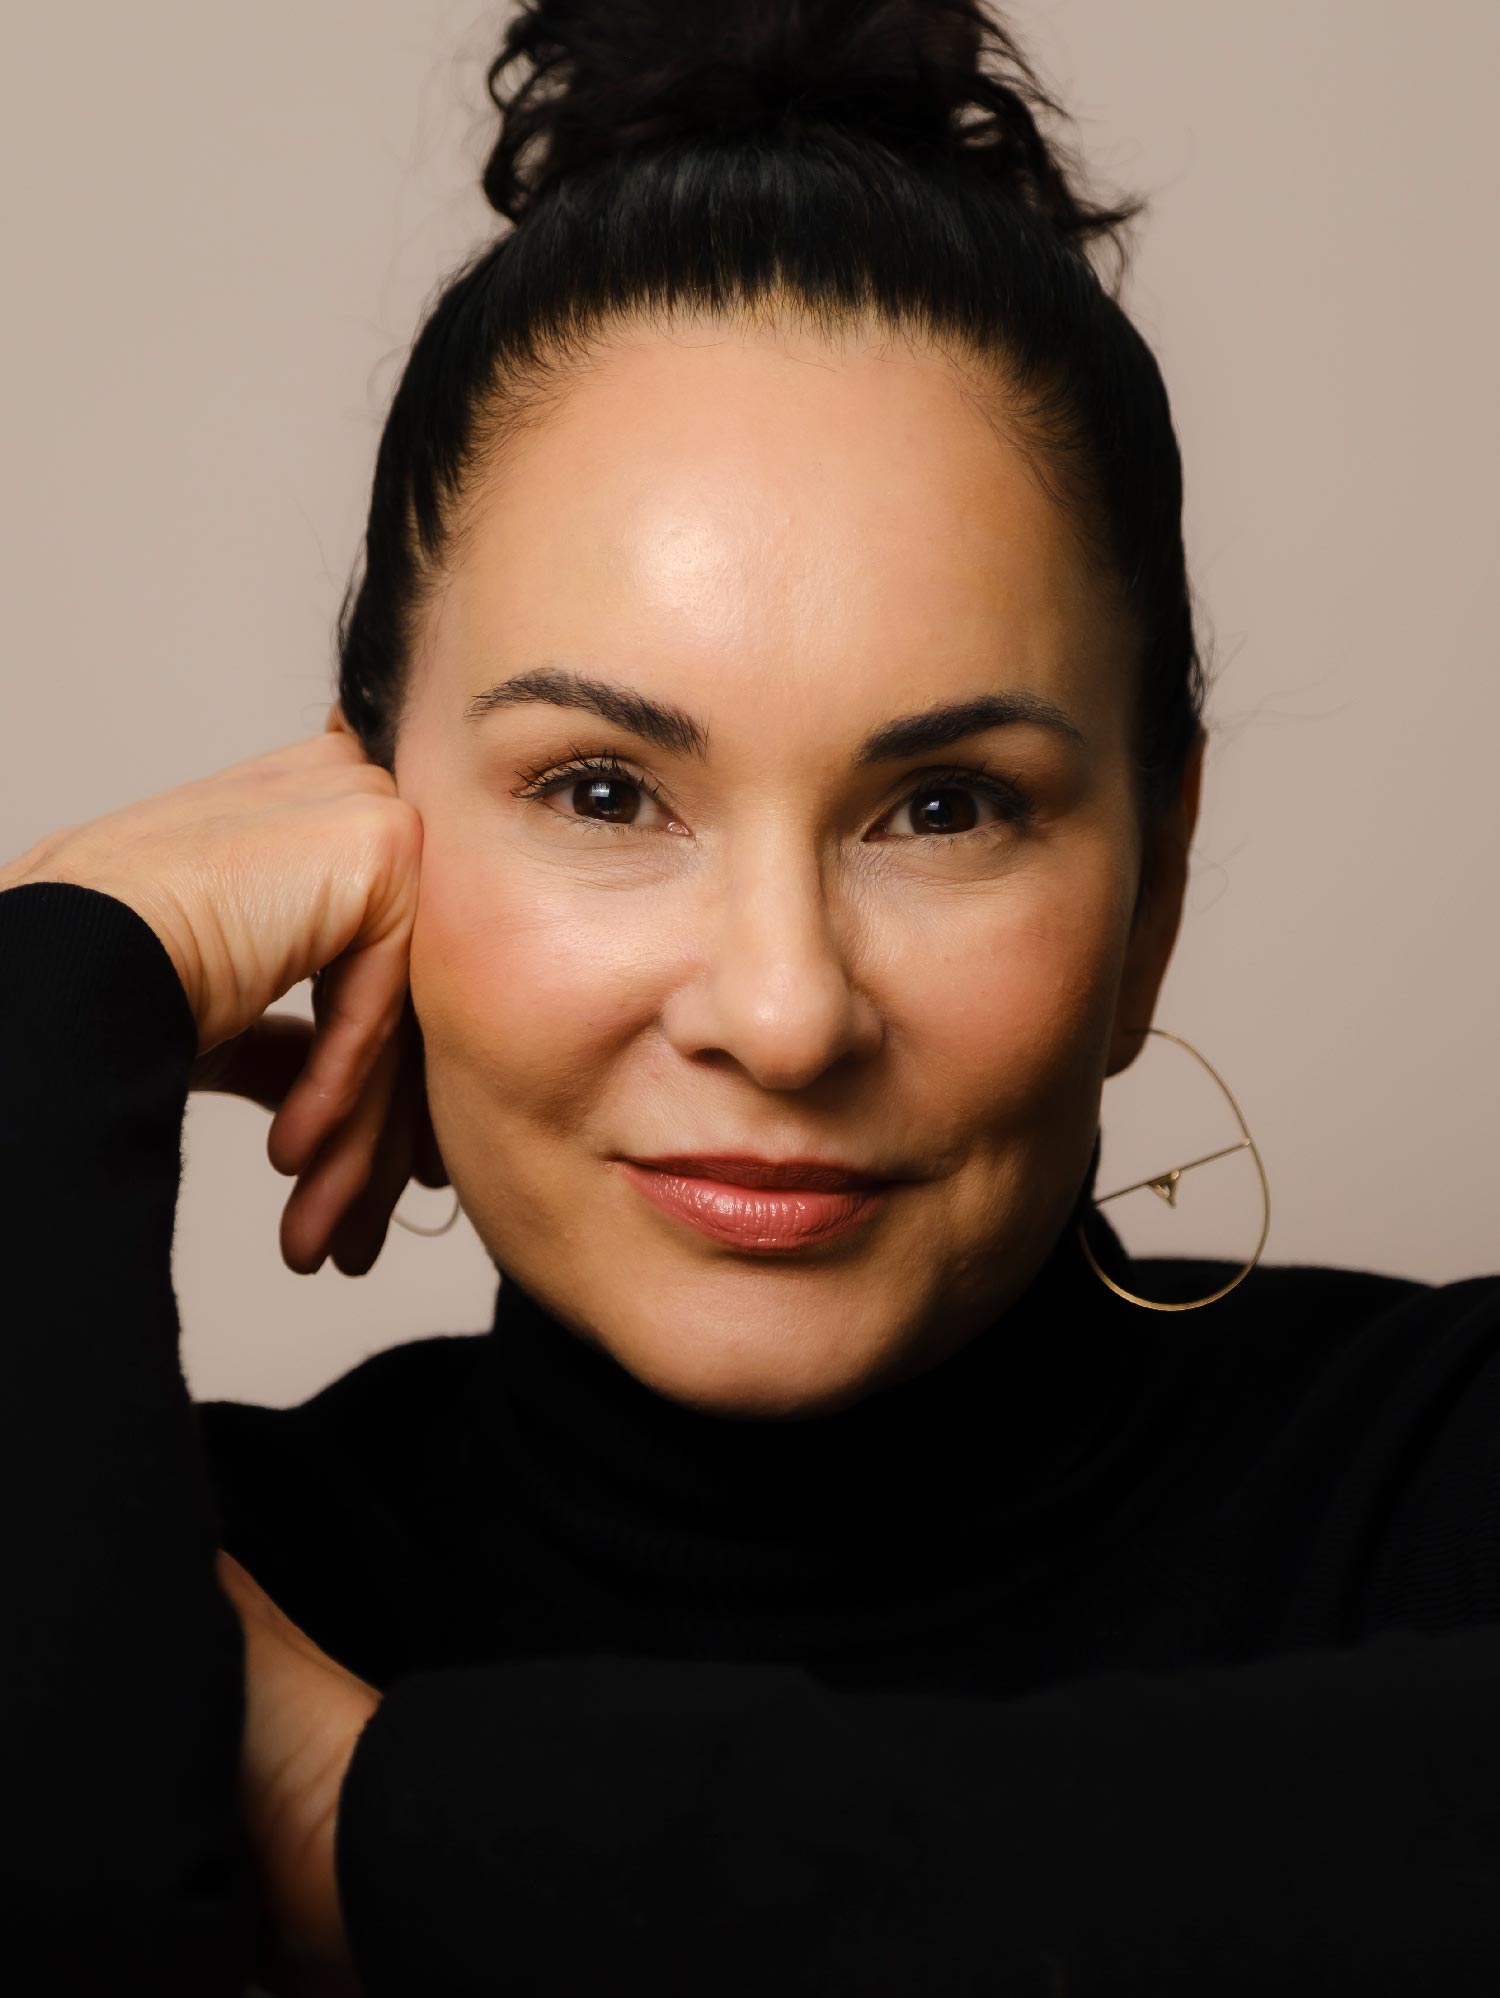 A close-up portrait of Shannon Carter-Gascon, wearing a black turtleneck with gold hoop earrings, against a khaki background.